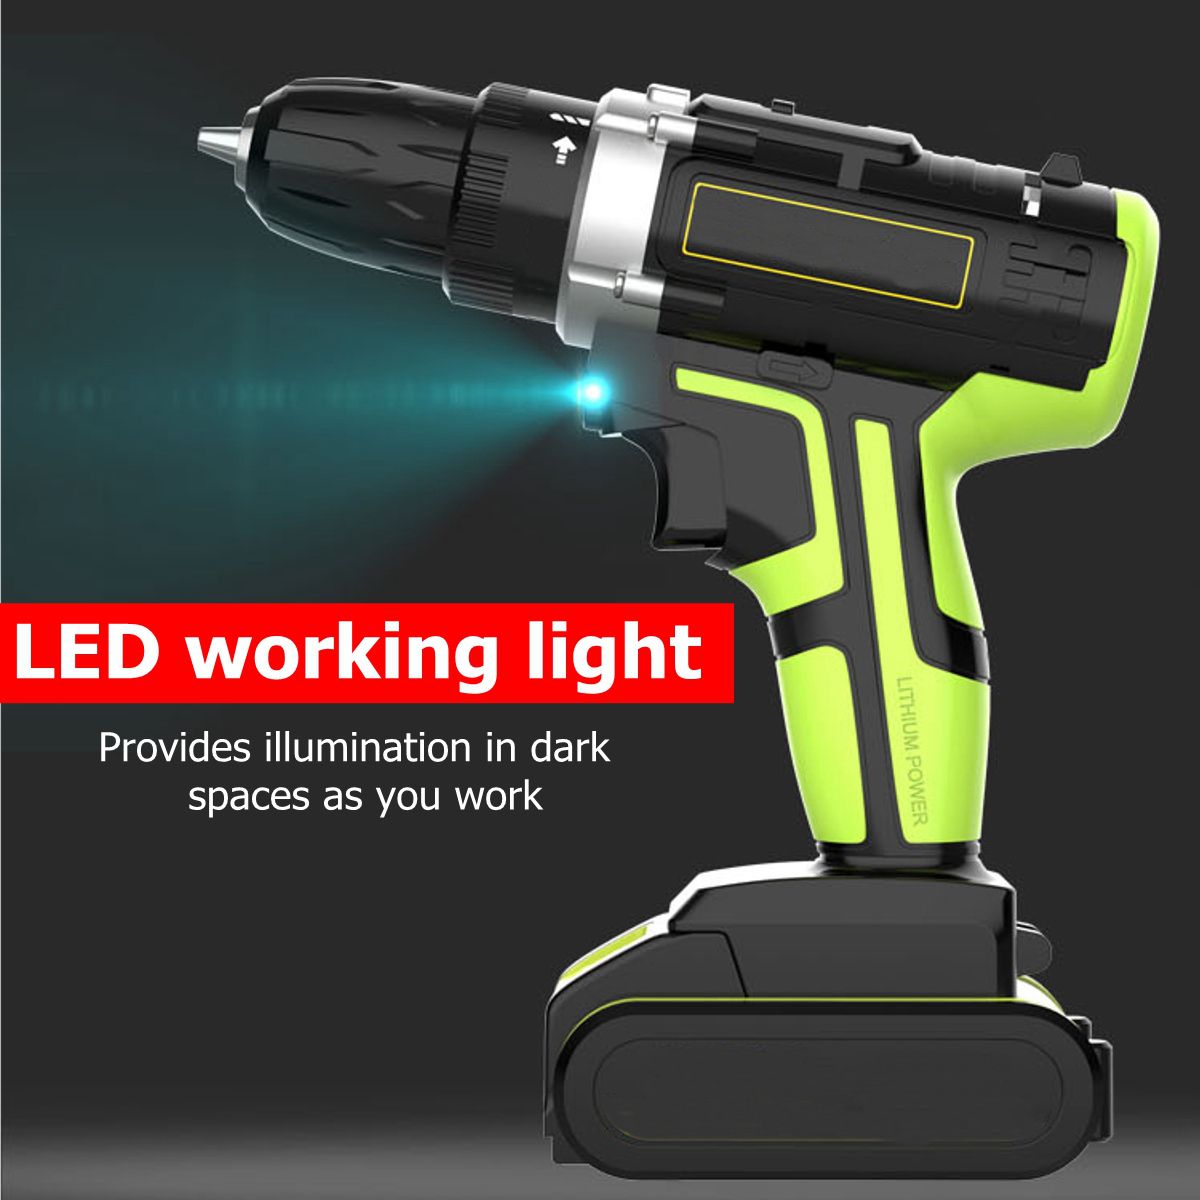 3-In-1-Hammer-Drill-48VF-Cordless-Drill-Double-Speed-Power-Drills-LED-lighting-12Pcs-Large-Capacity--1457207